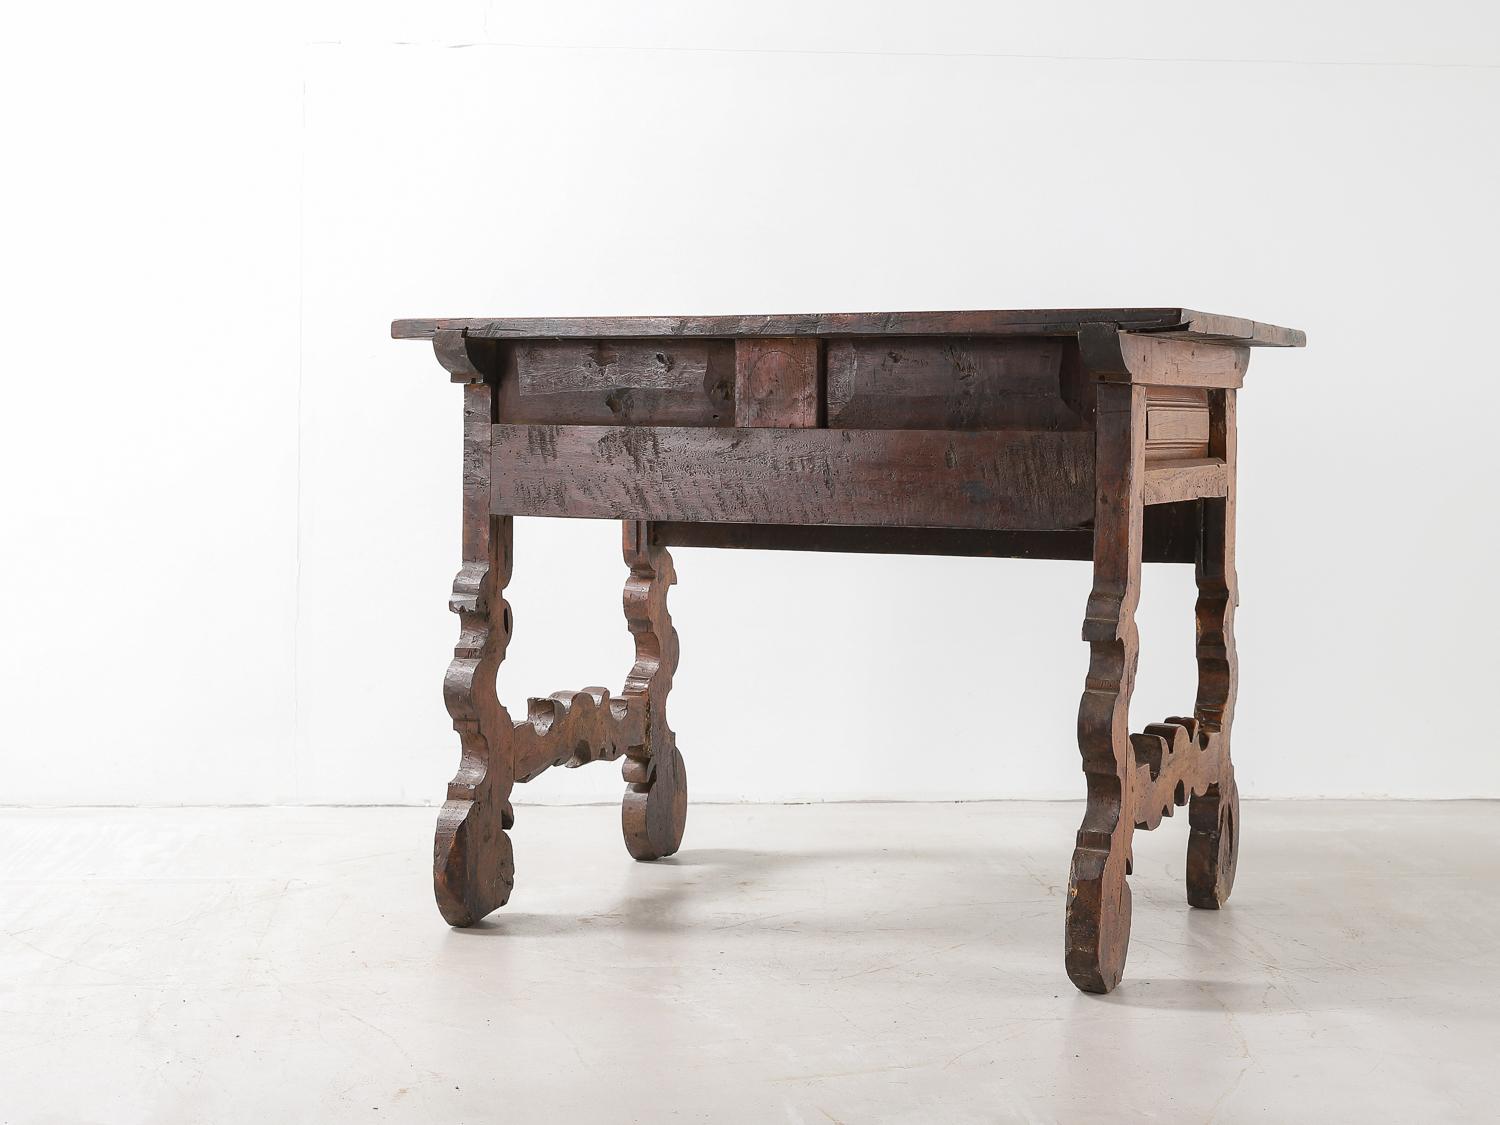 Spanish 18th Century Carved Walnut Table with Original Iron Pulls and Lyre Legs For Sale 2